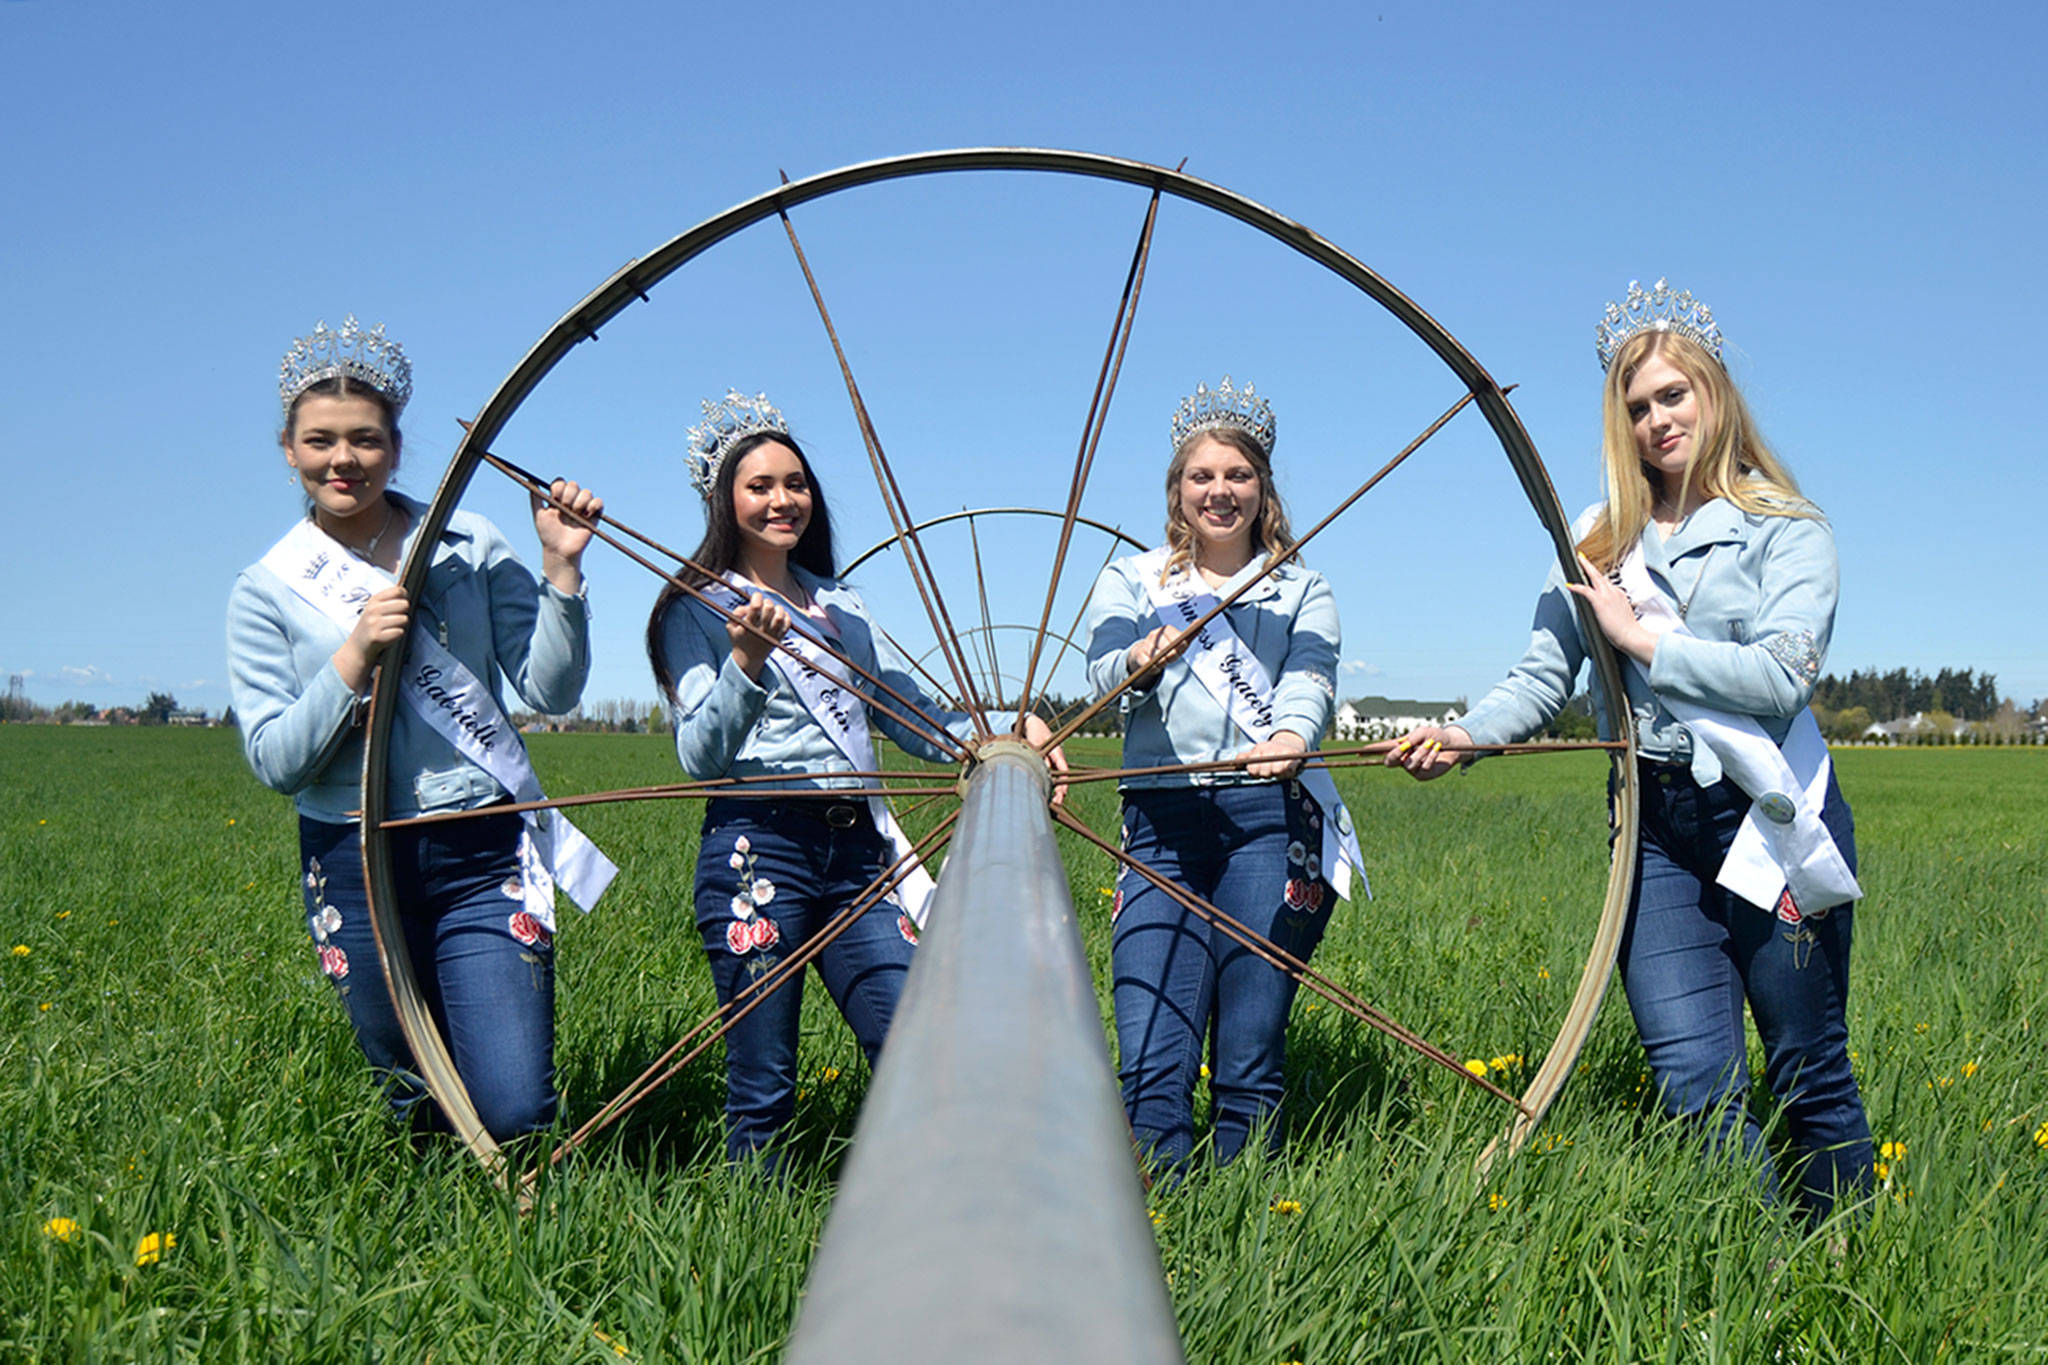 Sequim Irrigation Festival royalty, from left, Princess Gabi Simonson, Queen Erin Gordon, Princess Gracelyn Hurdlow and Princess Eden Batson stand by a sprinkler on the Dick Family Farm during a photo shoot for the festival’s programming. (Matthew Nash/Olympic Peninsula News Group)